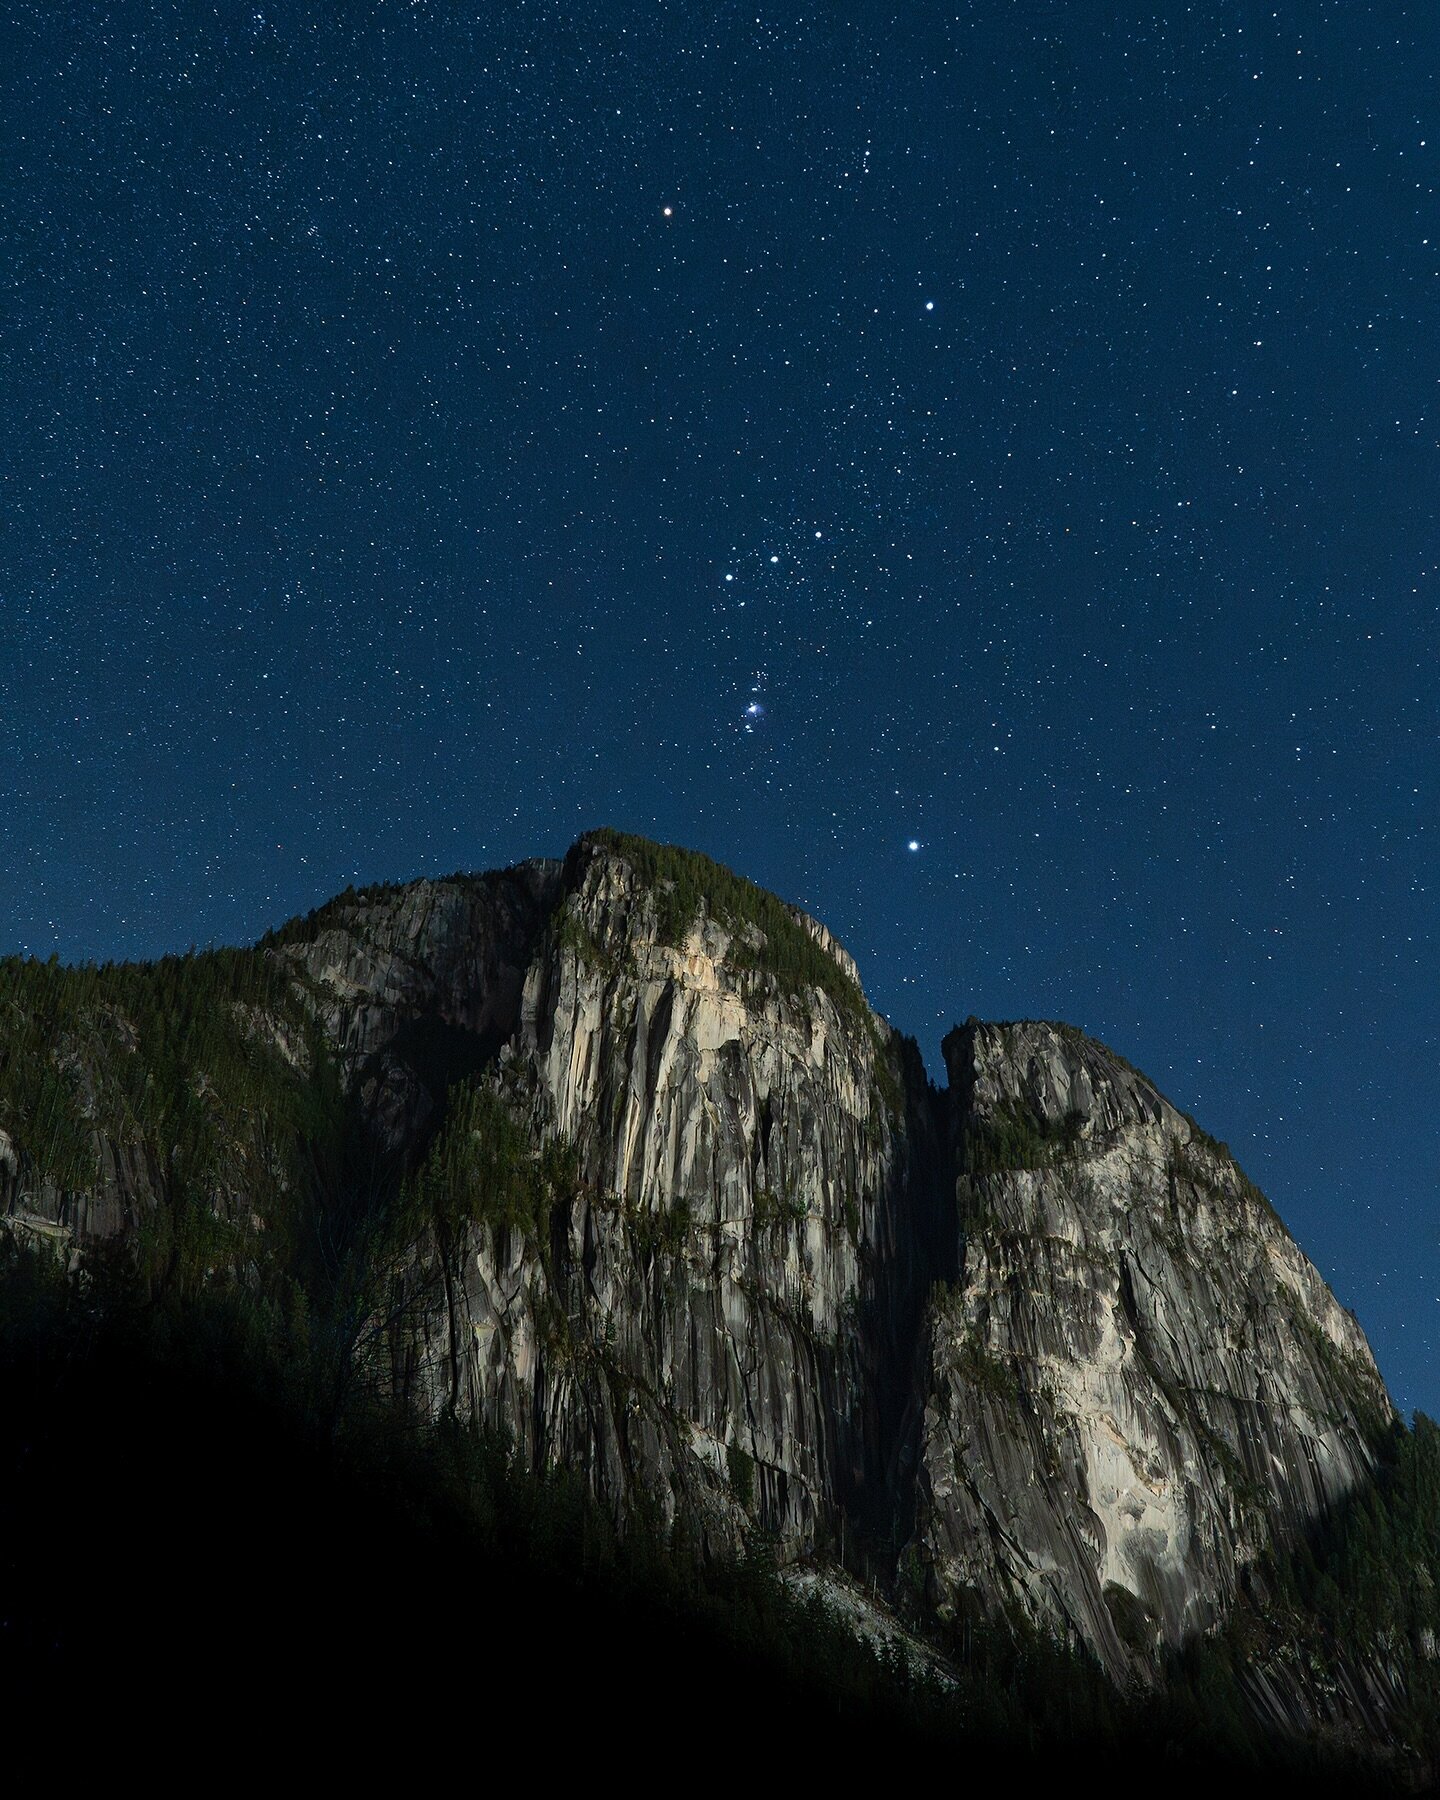 Orion dancing on the Chief!

Finally, after nearly a month of overcast skies or rain/snow, Squamish gifts us with unseasonably dry and warm weather. 🌤️ This shot has been brewing in my mind for some time. Patience was key, but as the skies cleared, 